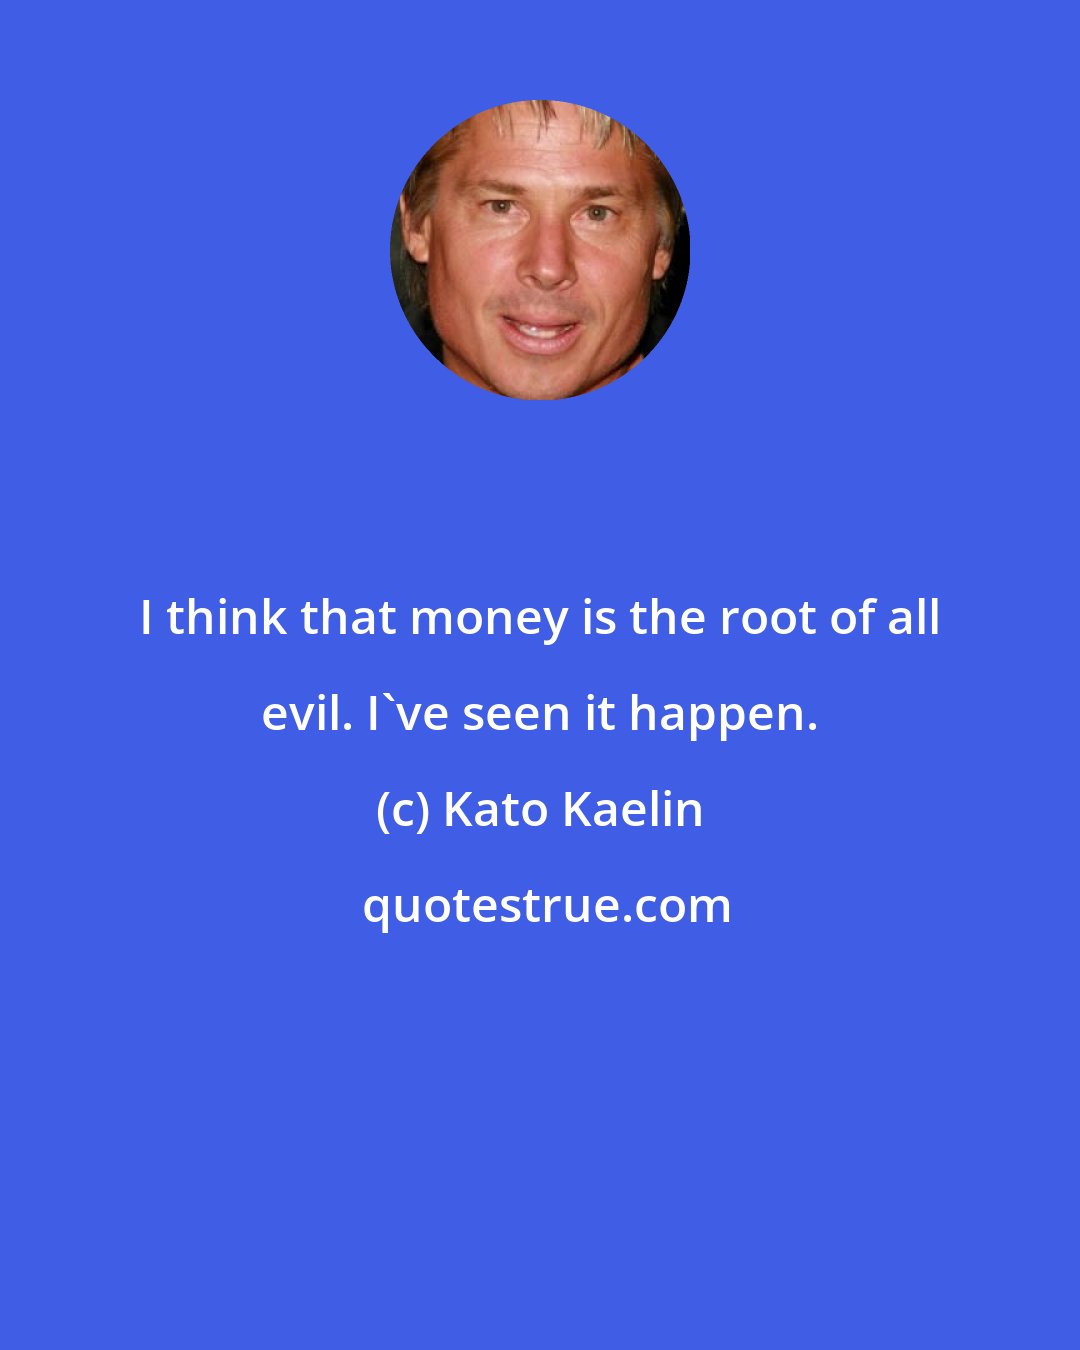 Kato Kaelin: I think that money is the root of all evil. I've seen it happen.